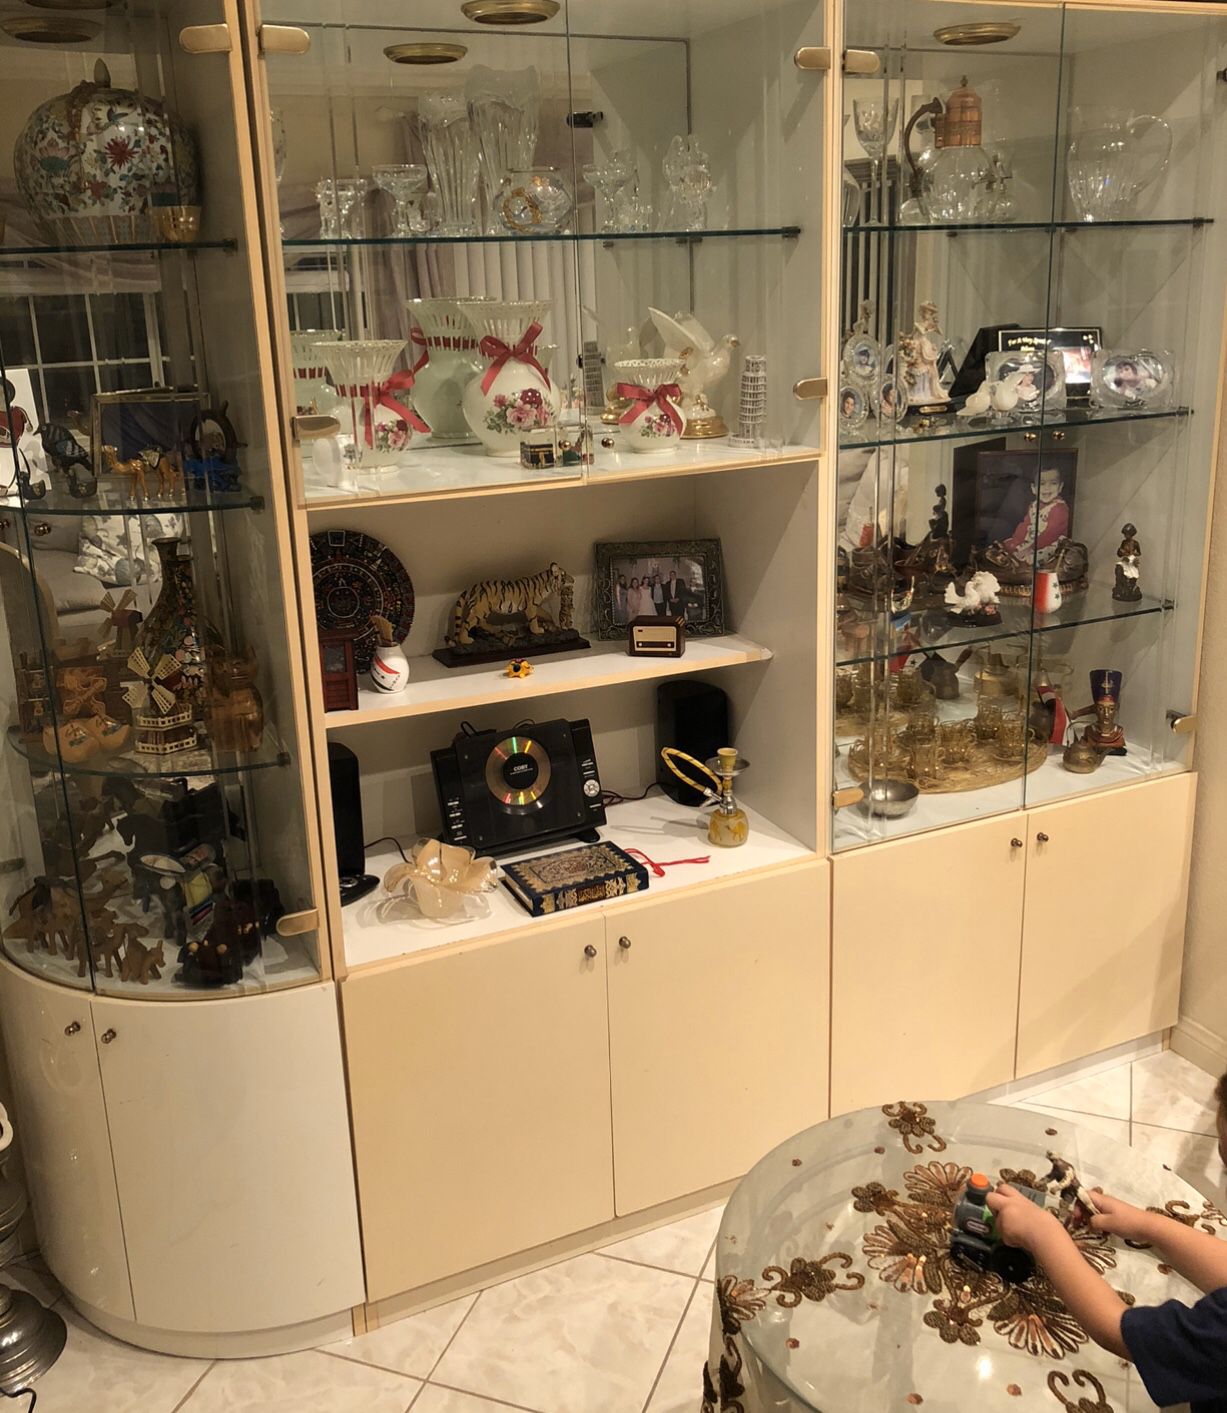 Used Normal Wear 3 Pieces Lightning China Cabinet With Glass Shelves And Door 🚪